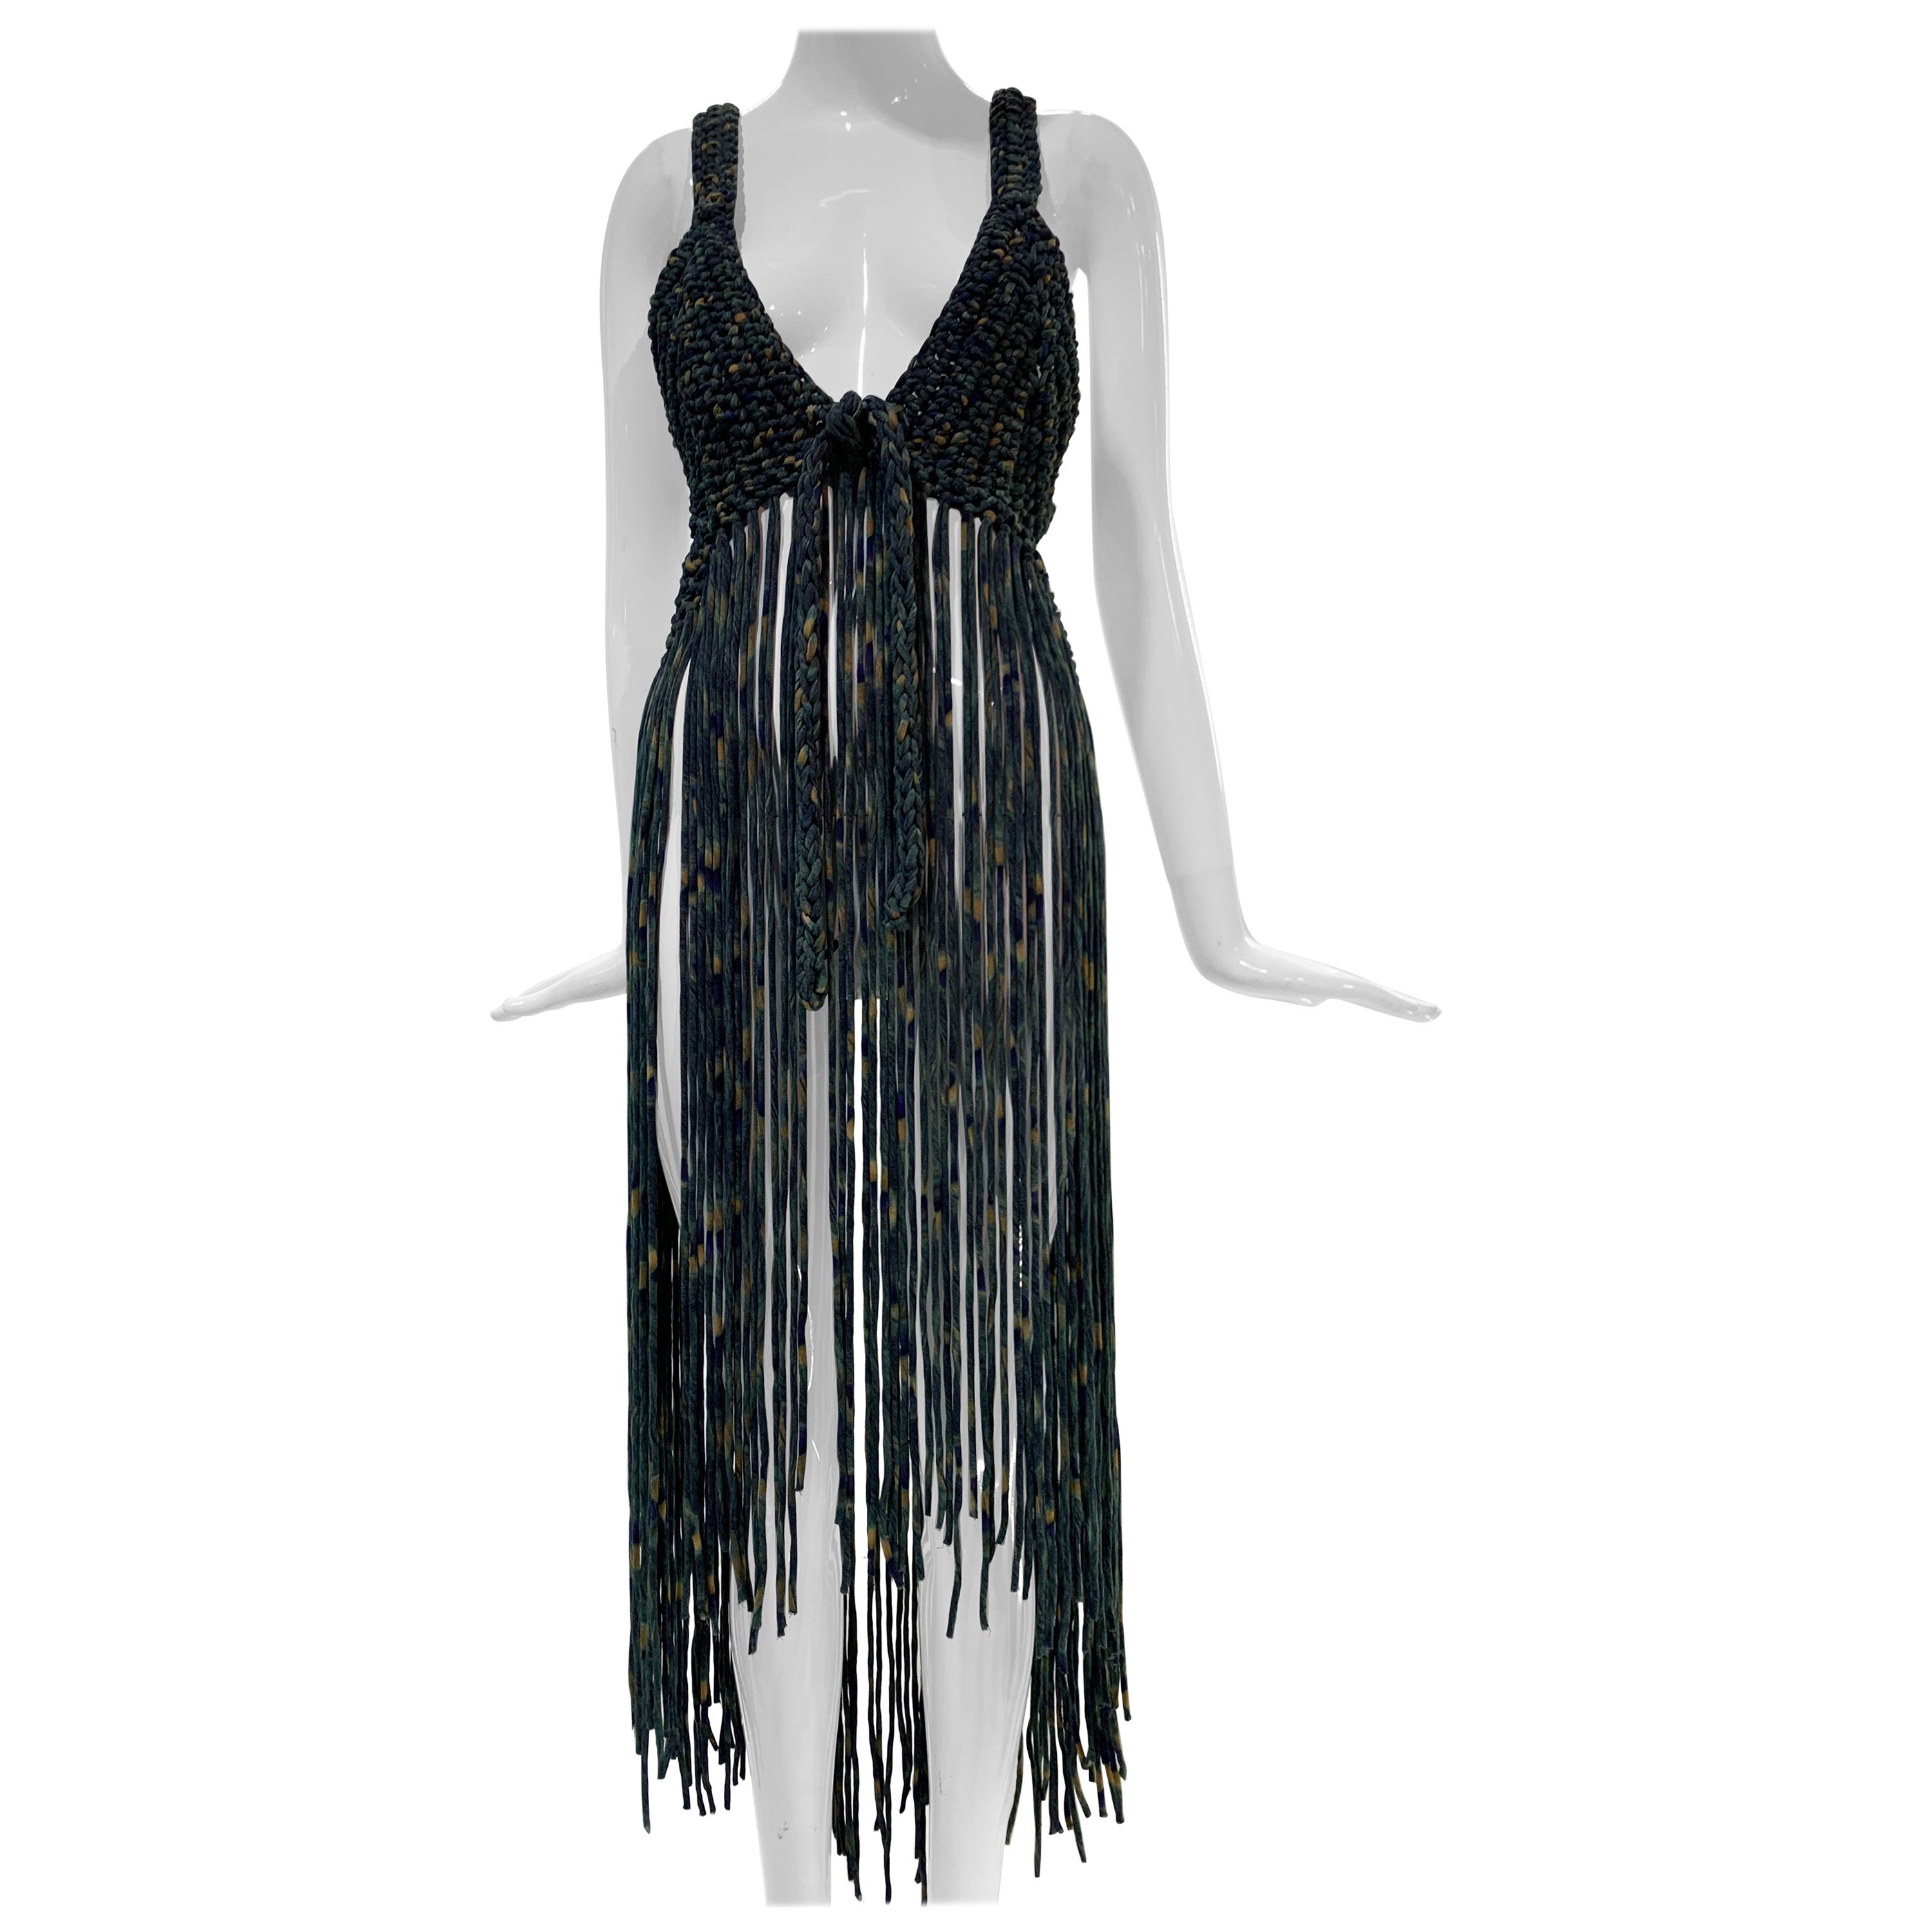 Torso Creations Hand-Macrame Halter Swimsuit Coverup w/ Heavy Fringe & Front Tie For Sale